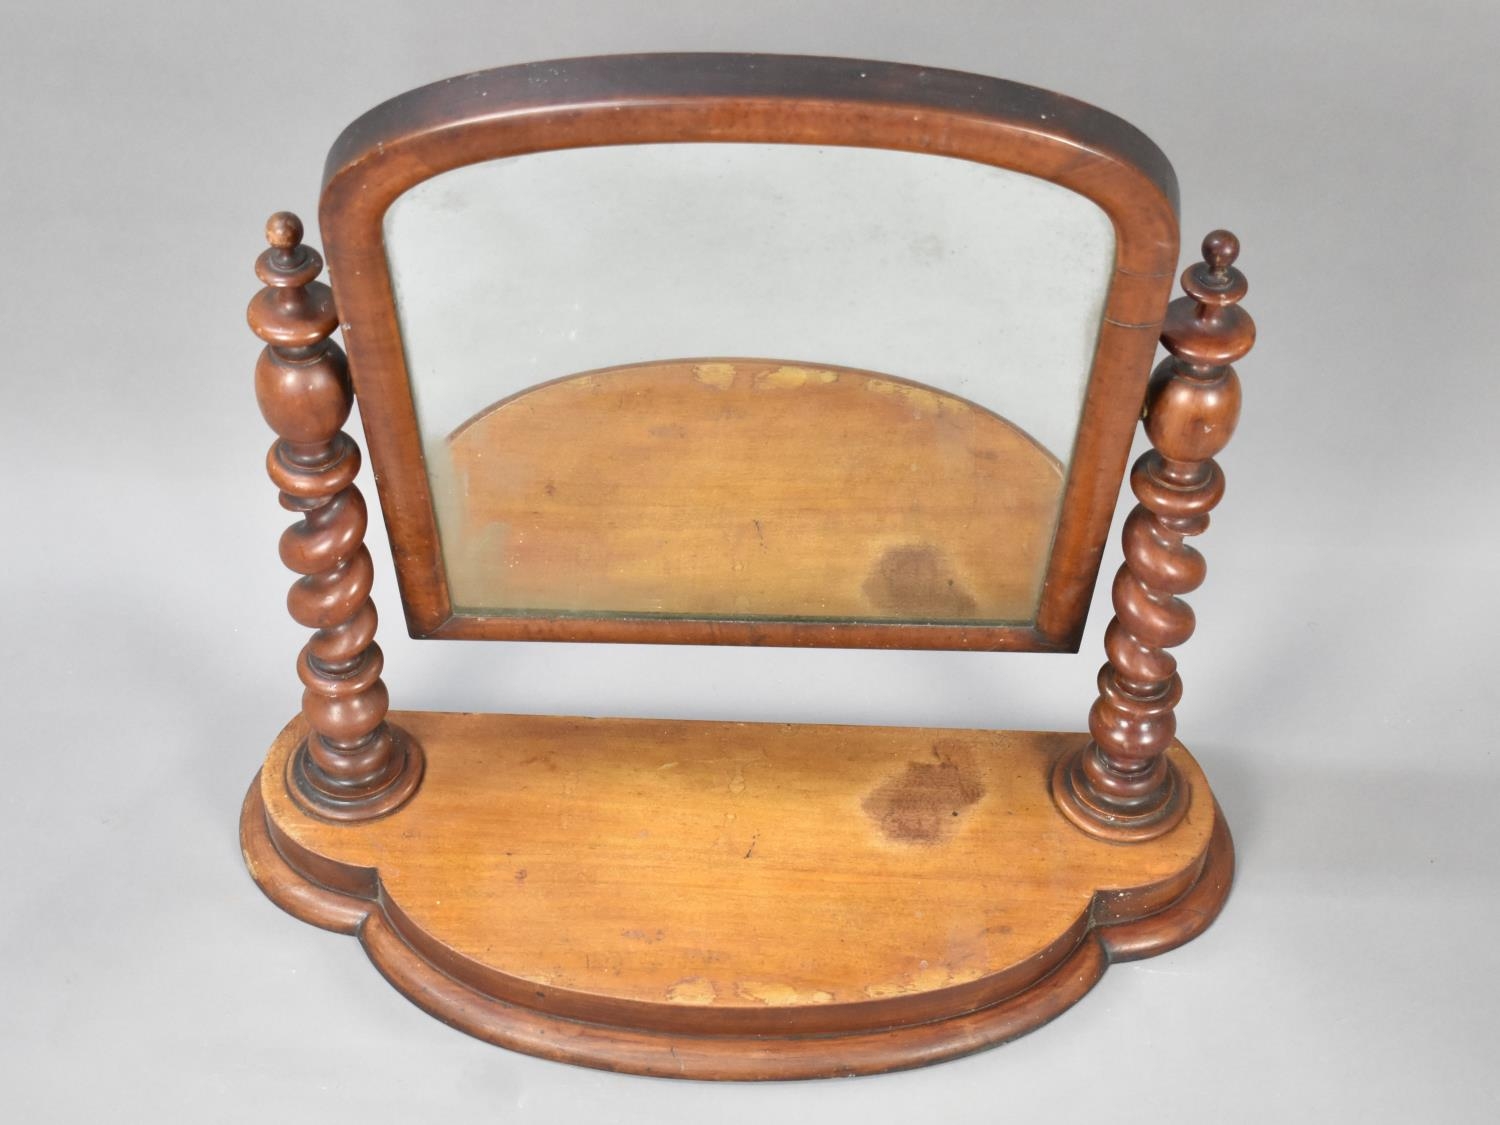 A Late Victorian Mahogany Swing Dressing Table Mirror with Barley Twist Supports and Serpentine - Image 2 of 2